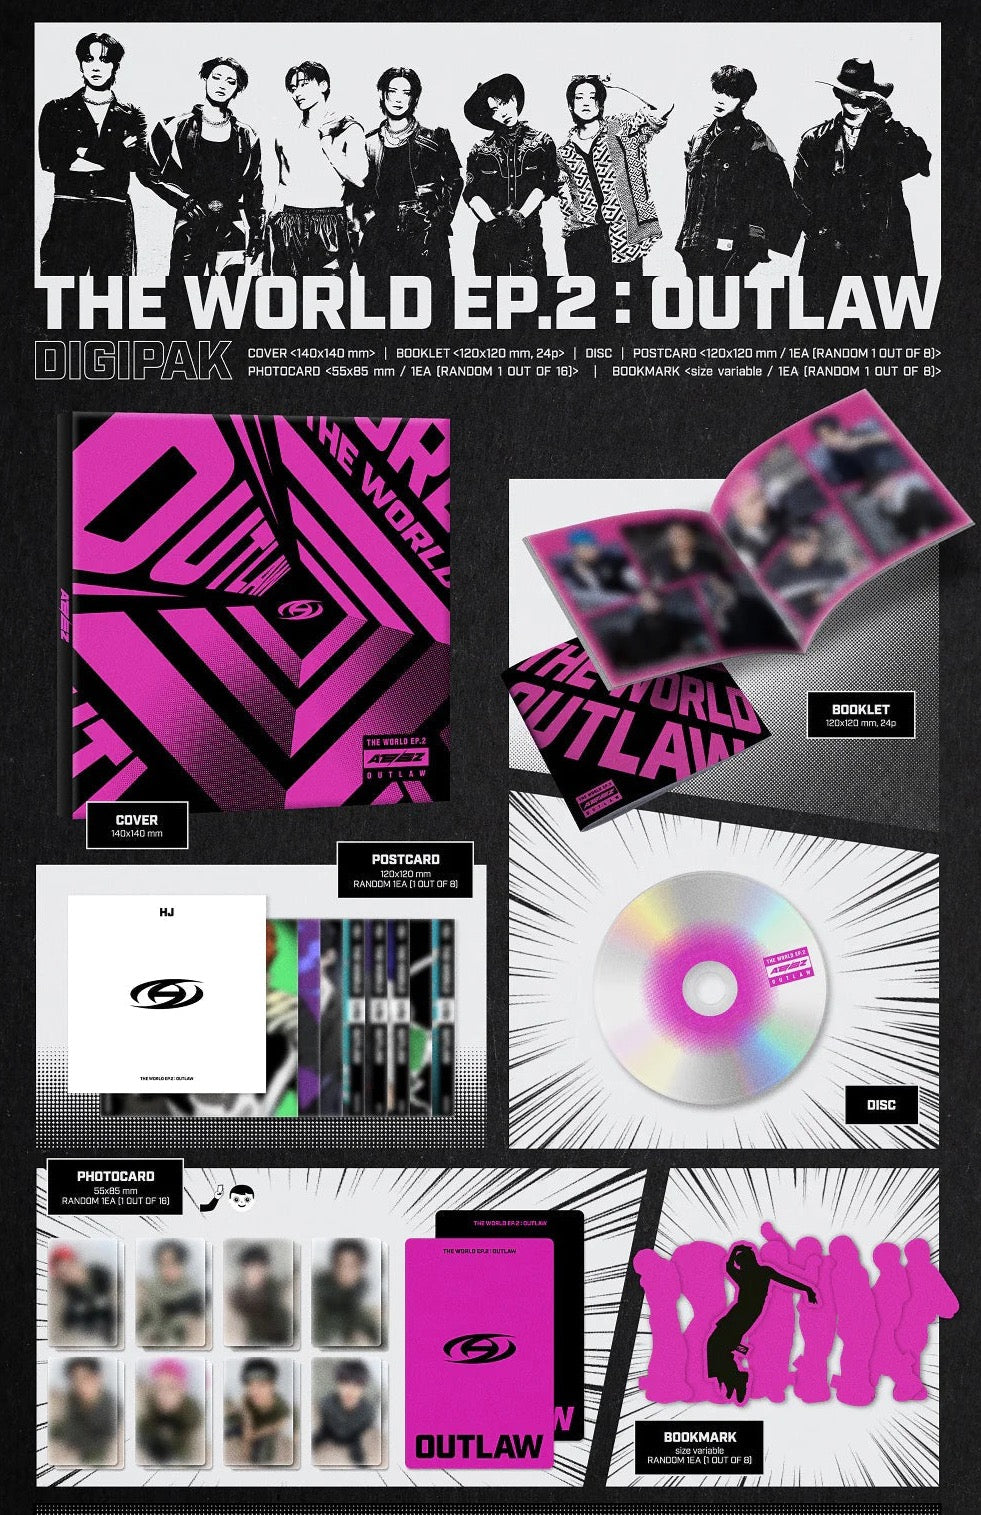 [HELLO82 EXCLUSIVE] ATEEZ - THE WORLD EP.2 OUTLAW (DIGIPACK VER.)